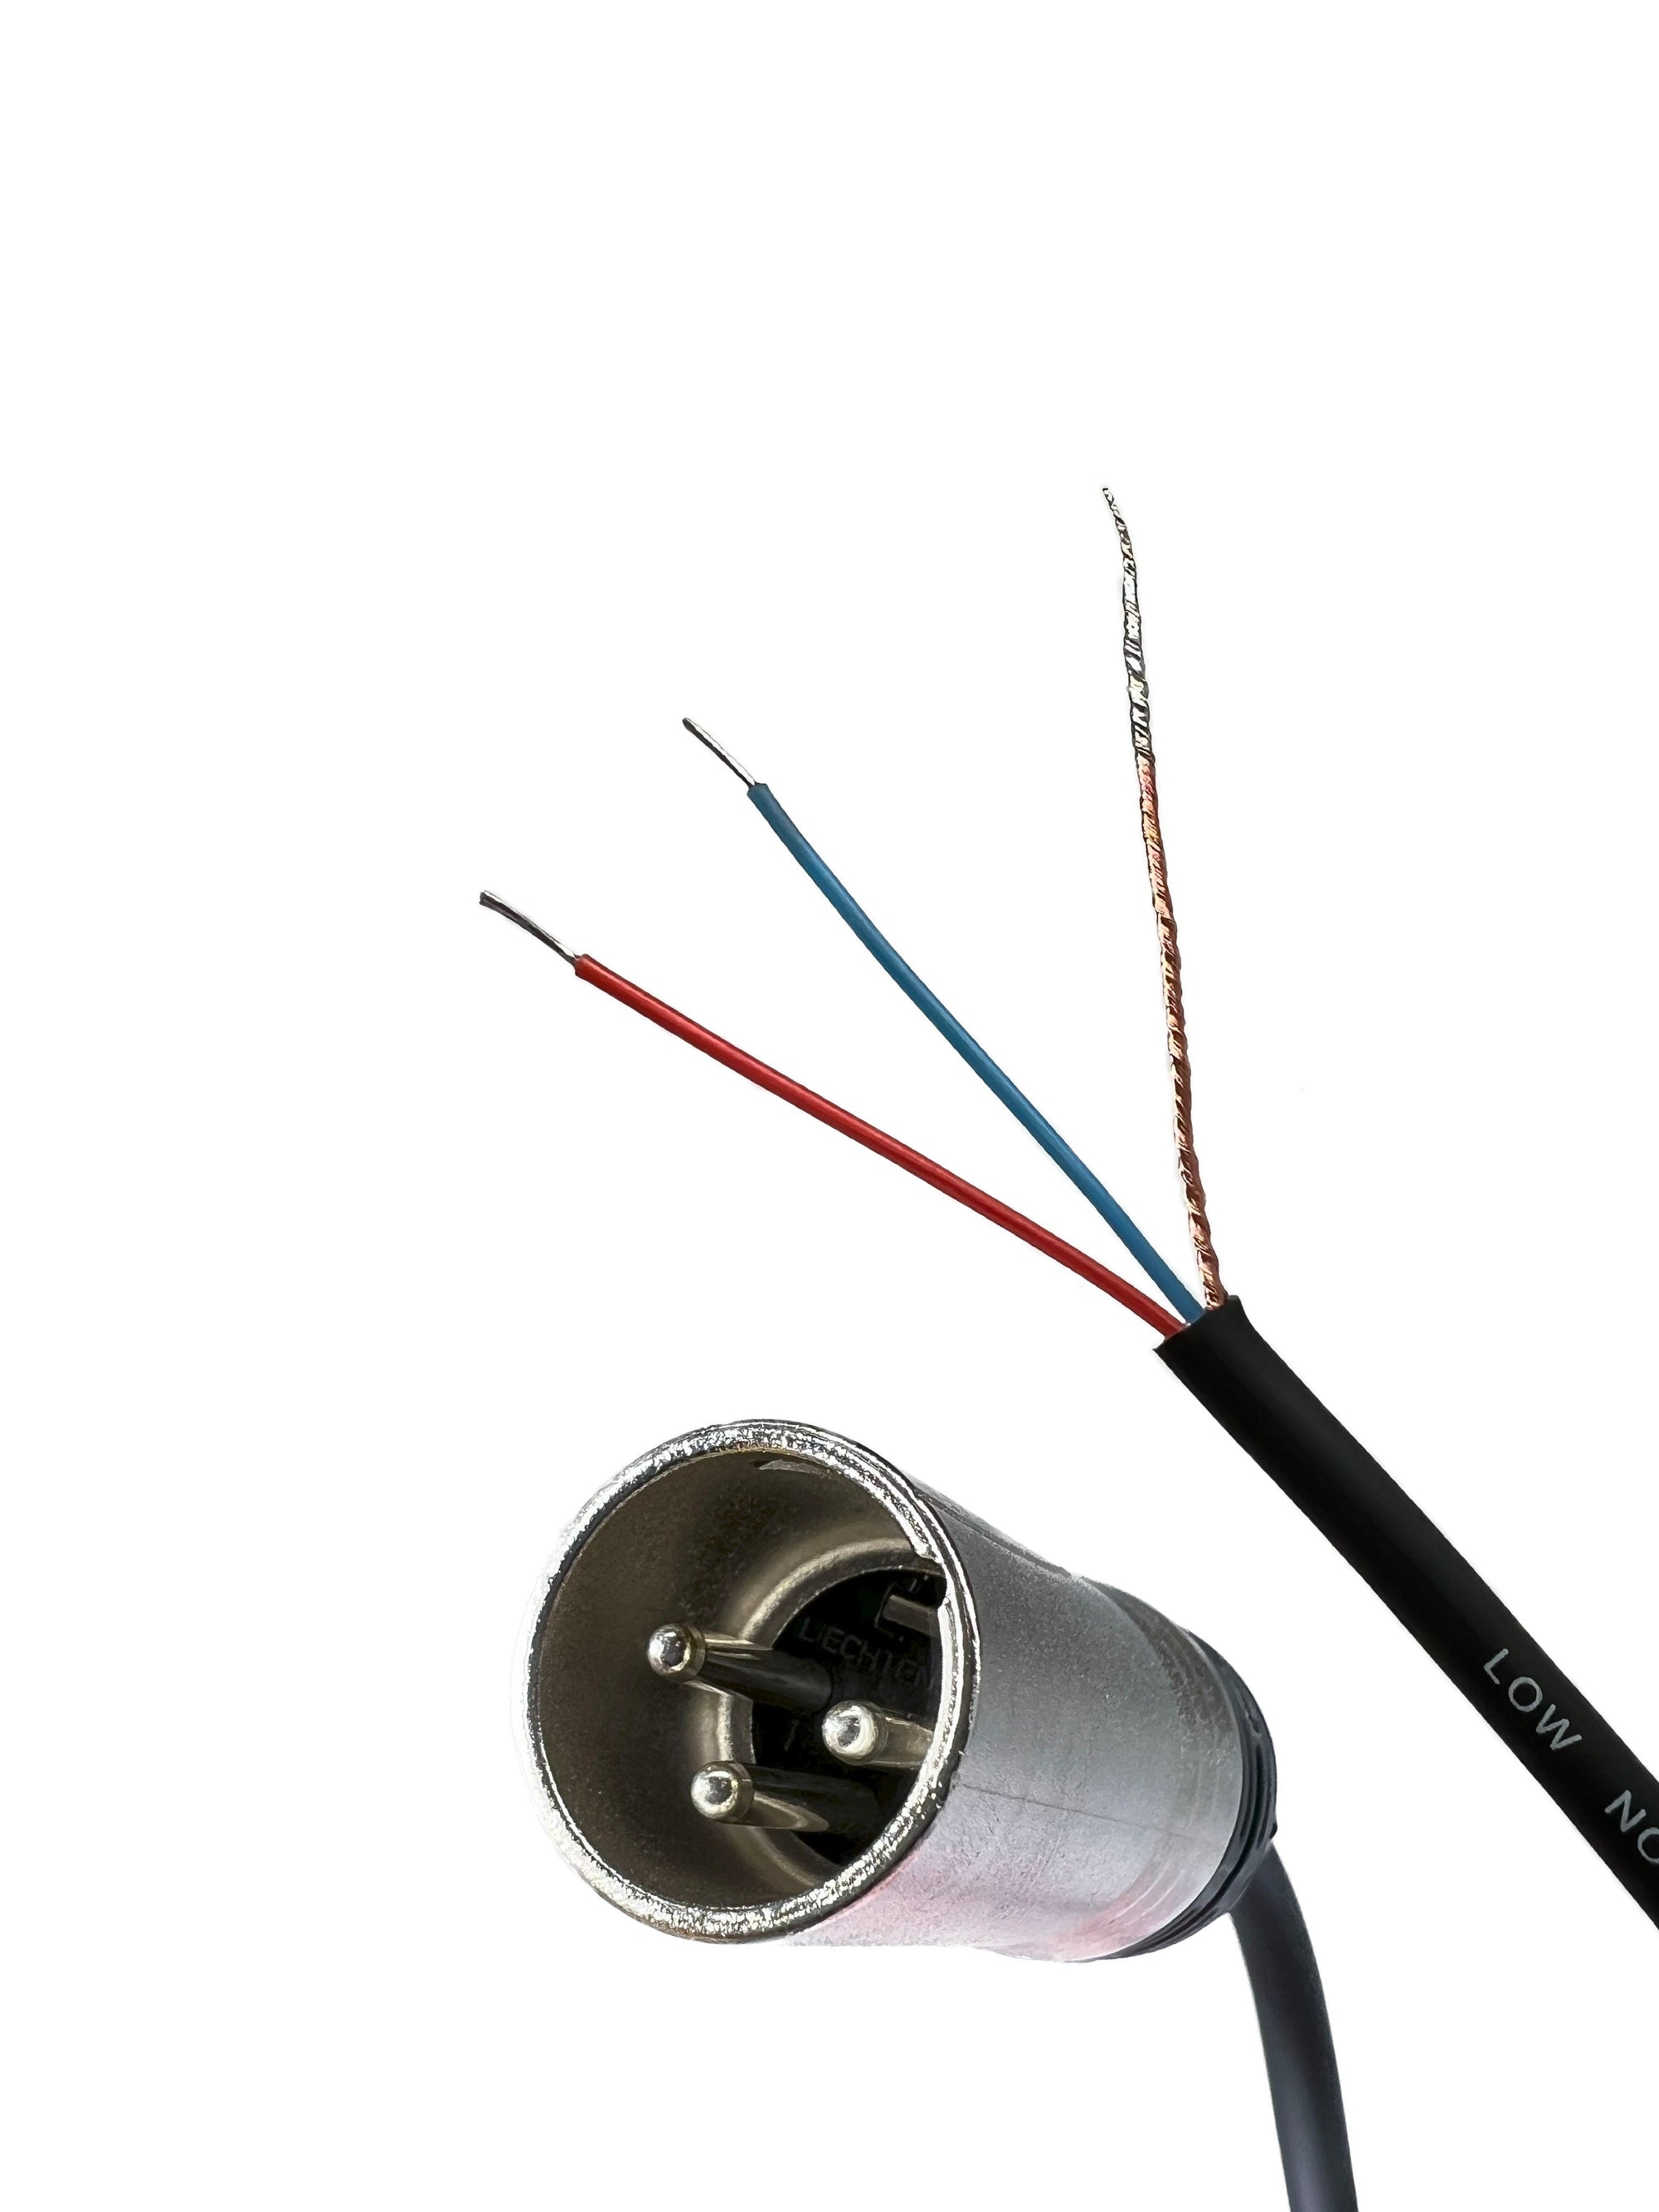 XLR 3 Pin to Blunt Installation Cable with Neutrik XLR Connectors (Mal -  Custom Cable Connection